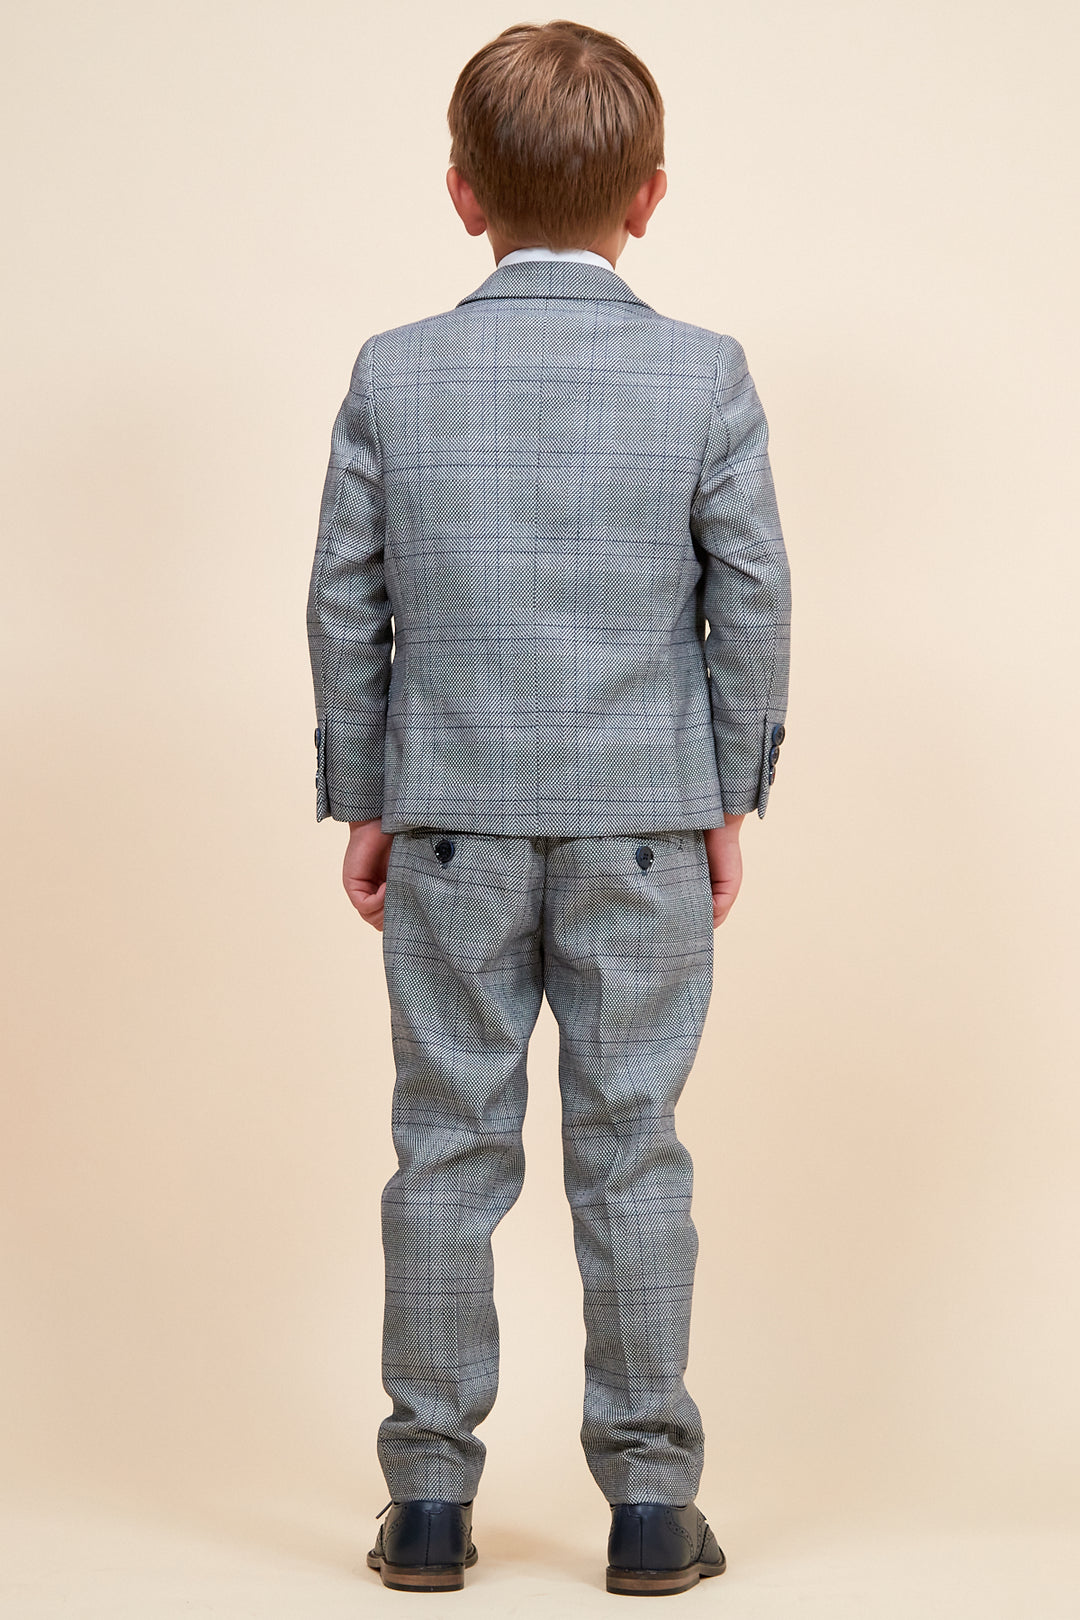 JERRY - Childrens Grey Check Three Piece Suit